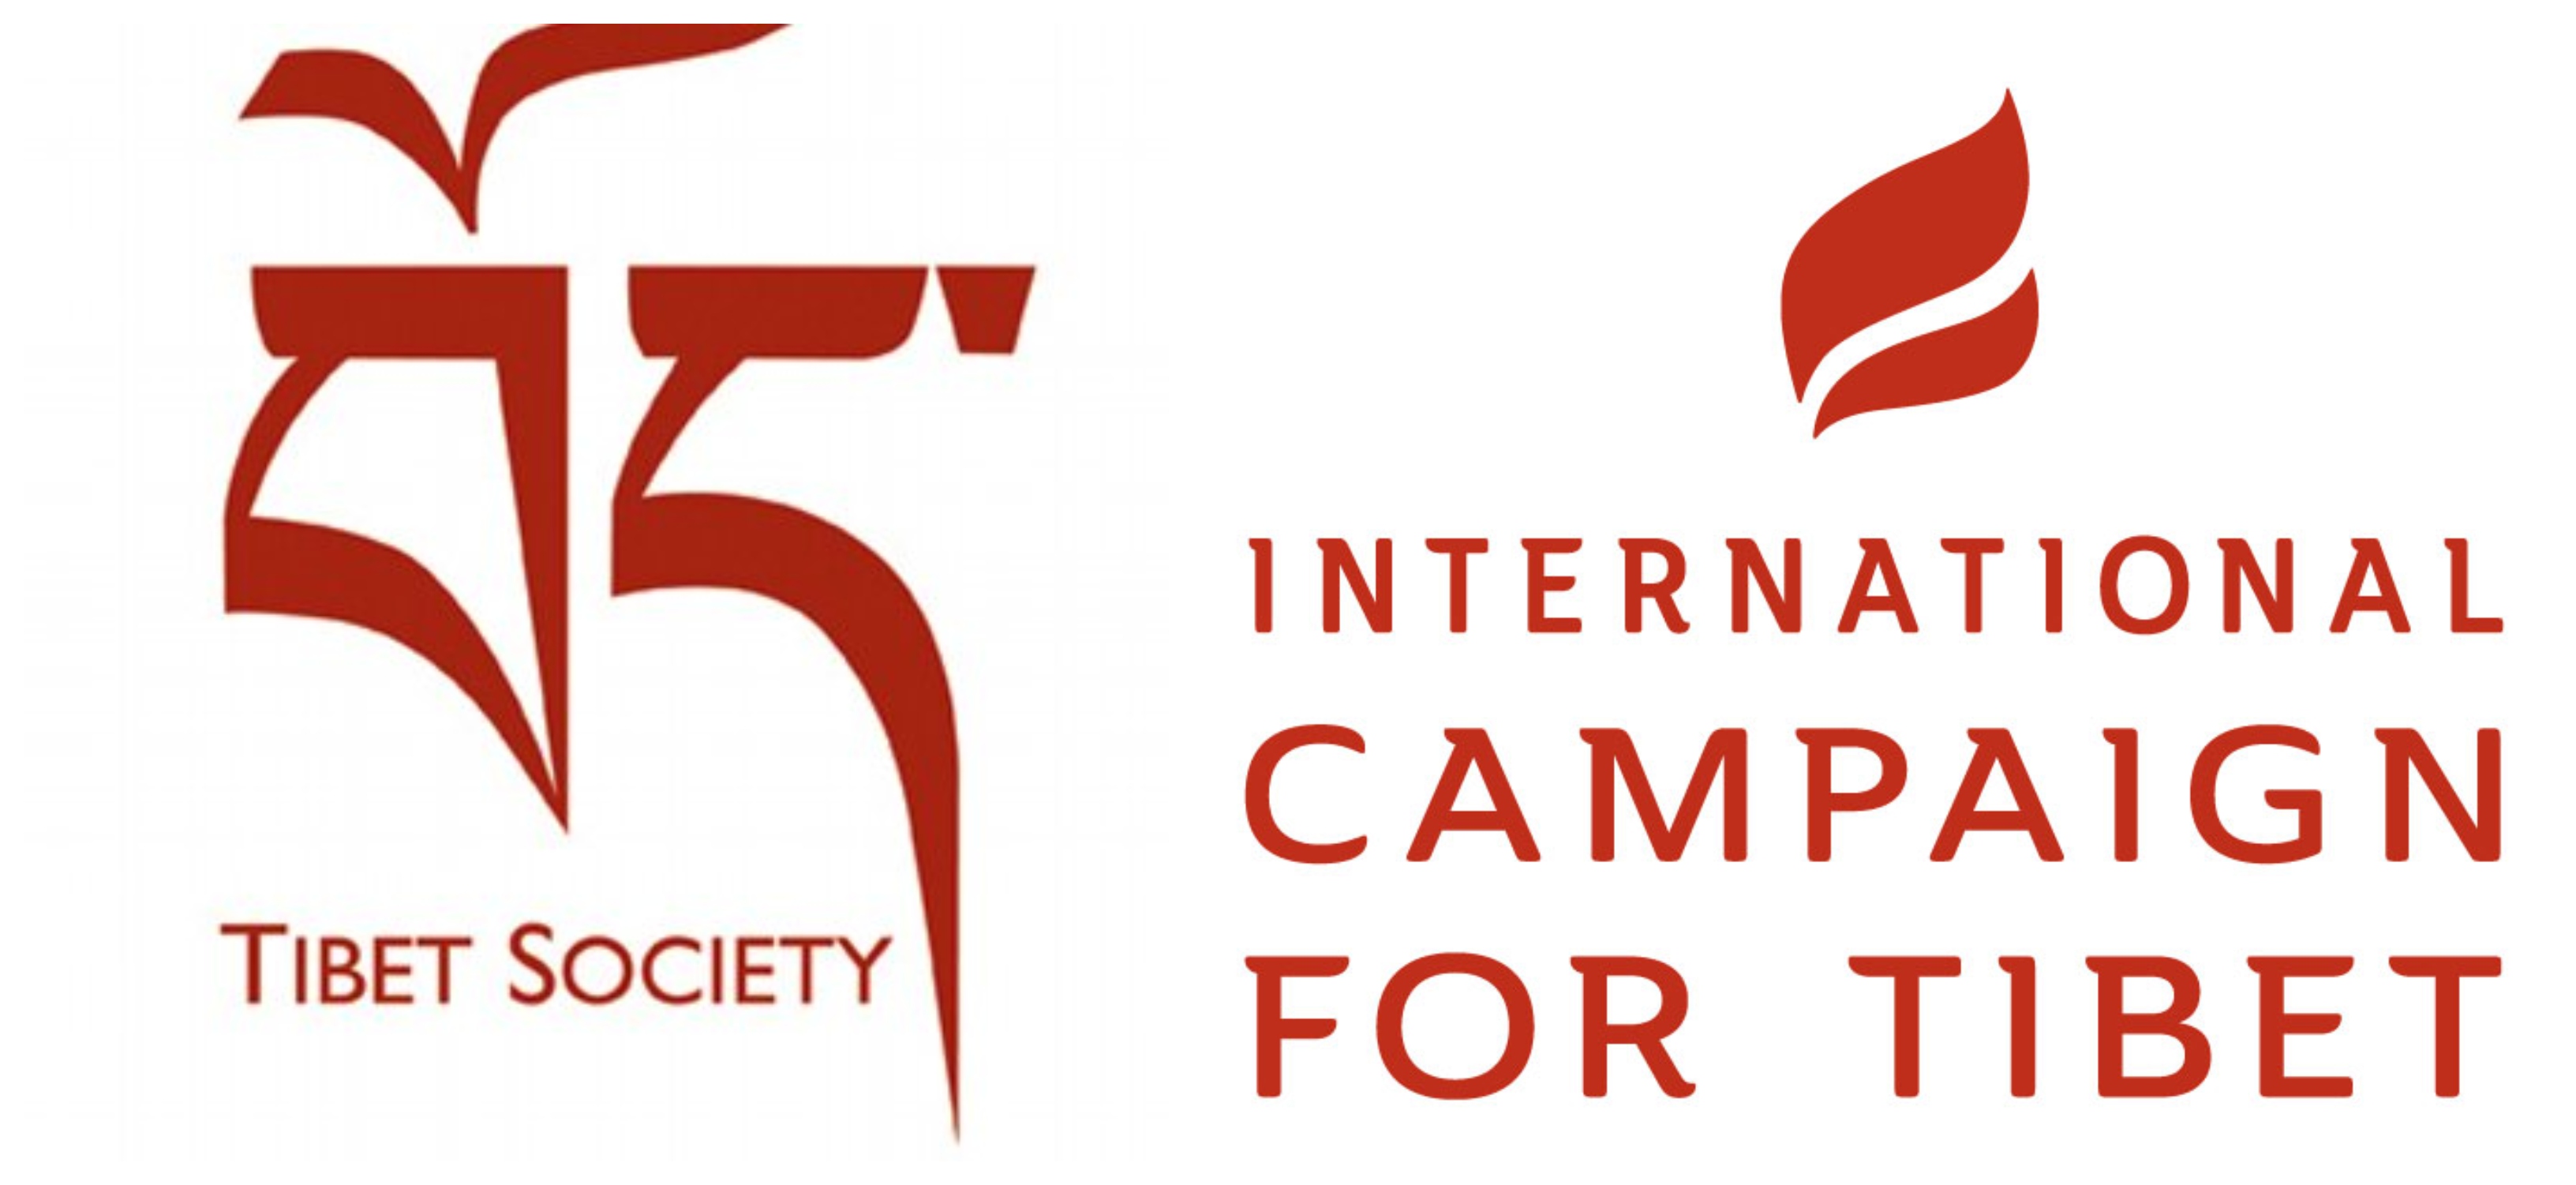 Tibet Society and the International Campaign for Tibet Issue a Joint Submission to the UK Foreign Affairs Committee